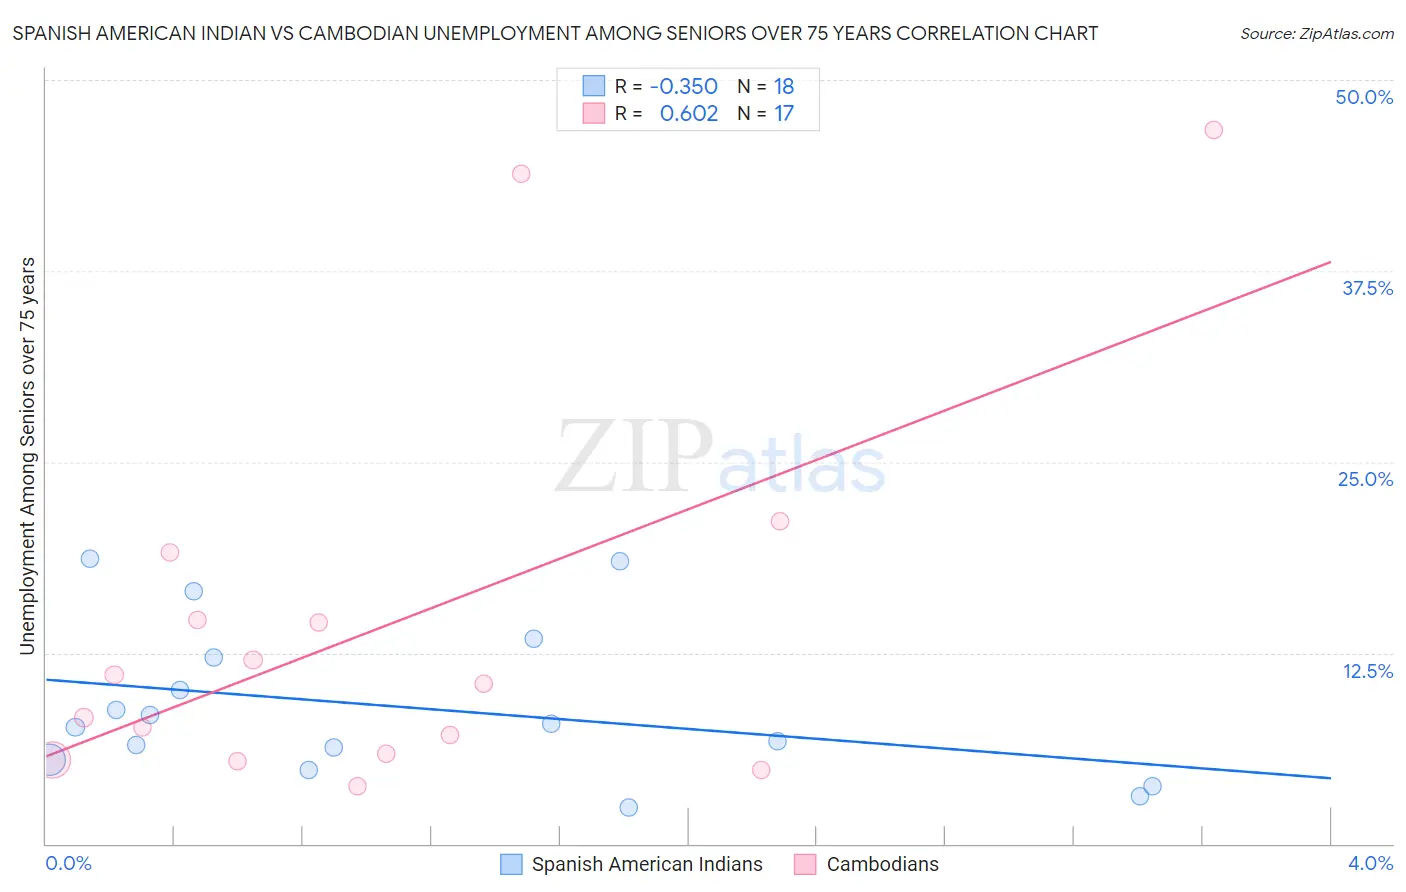 Spanish American Indian vs Cambodian Unemployment Among Seniors over 75 years